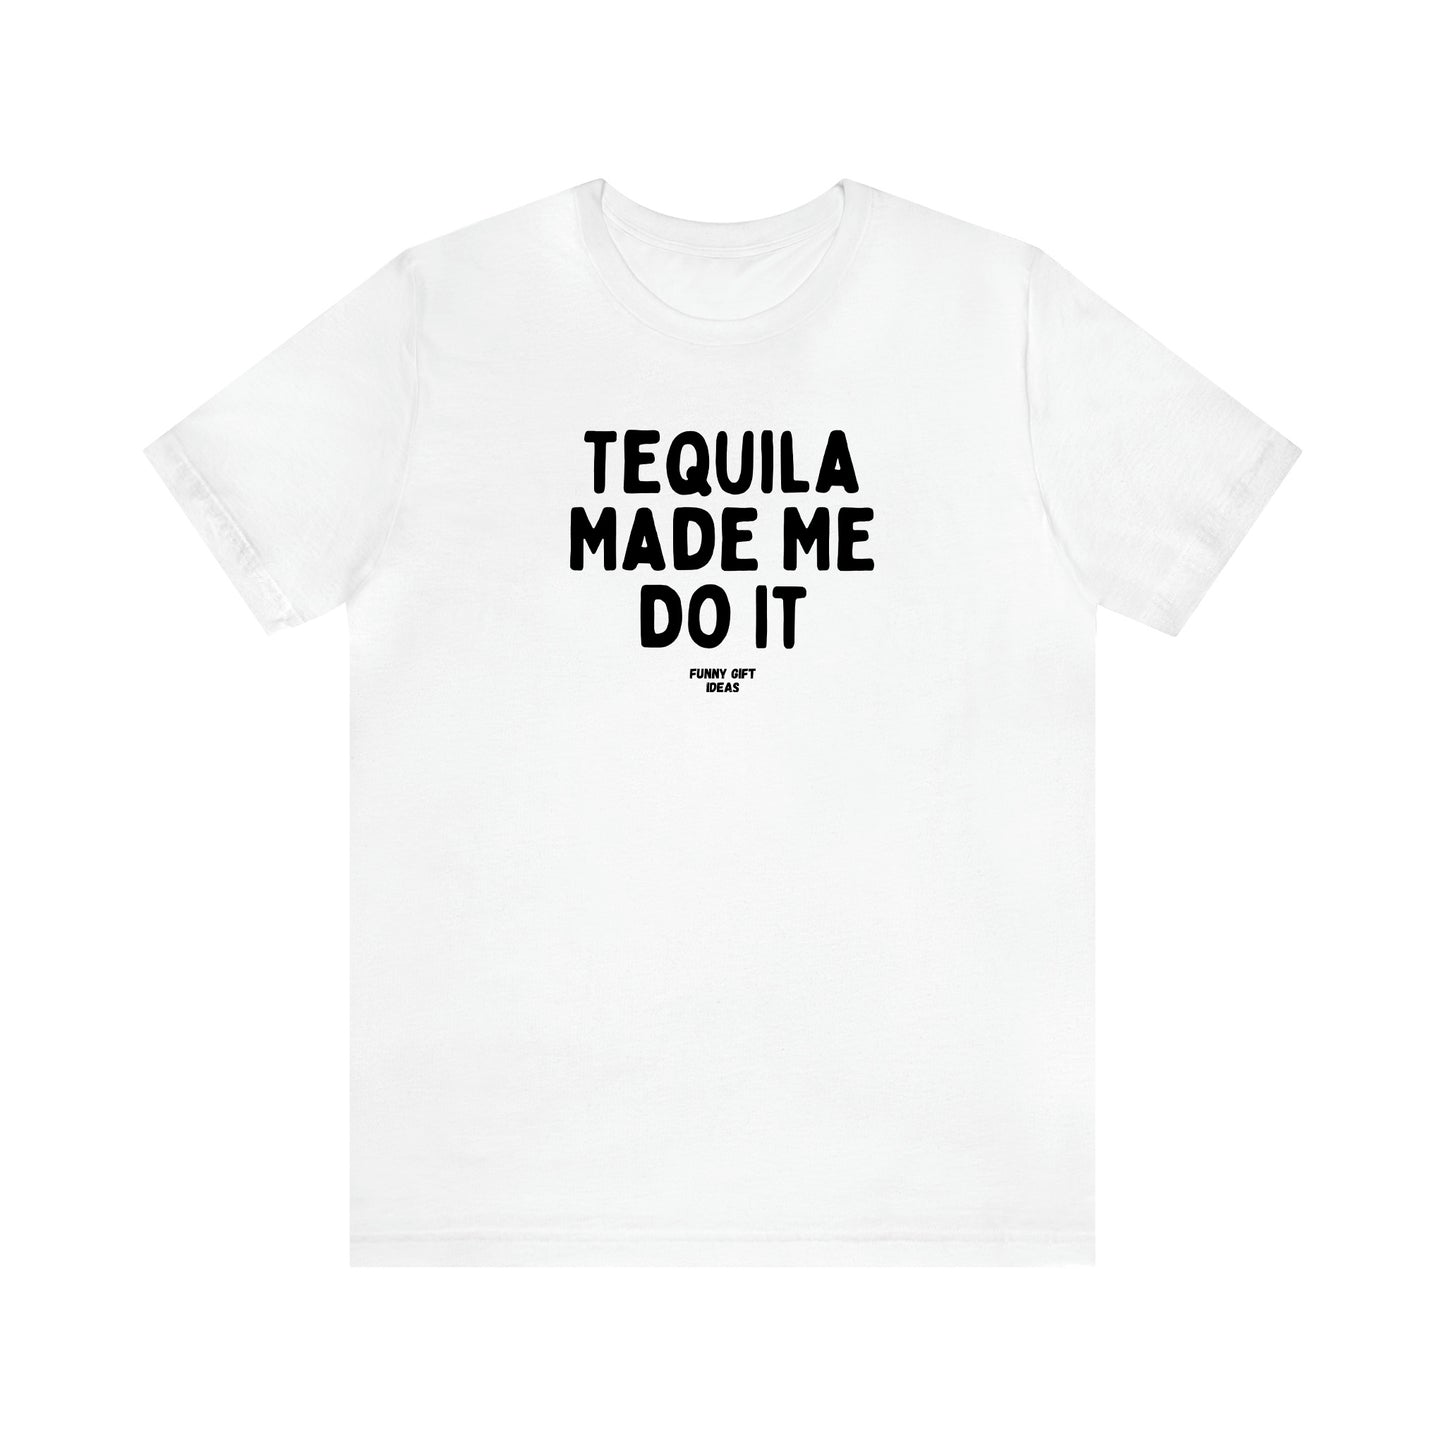 Women's T Shirts Tequila Made Me Do It - Funny Gift Ideas